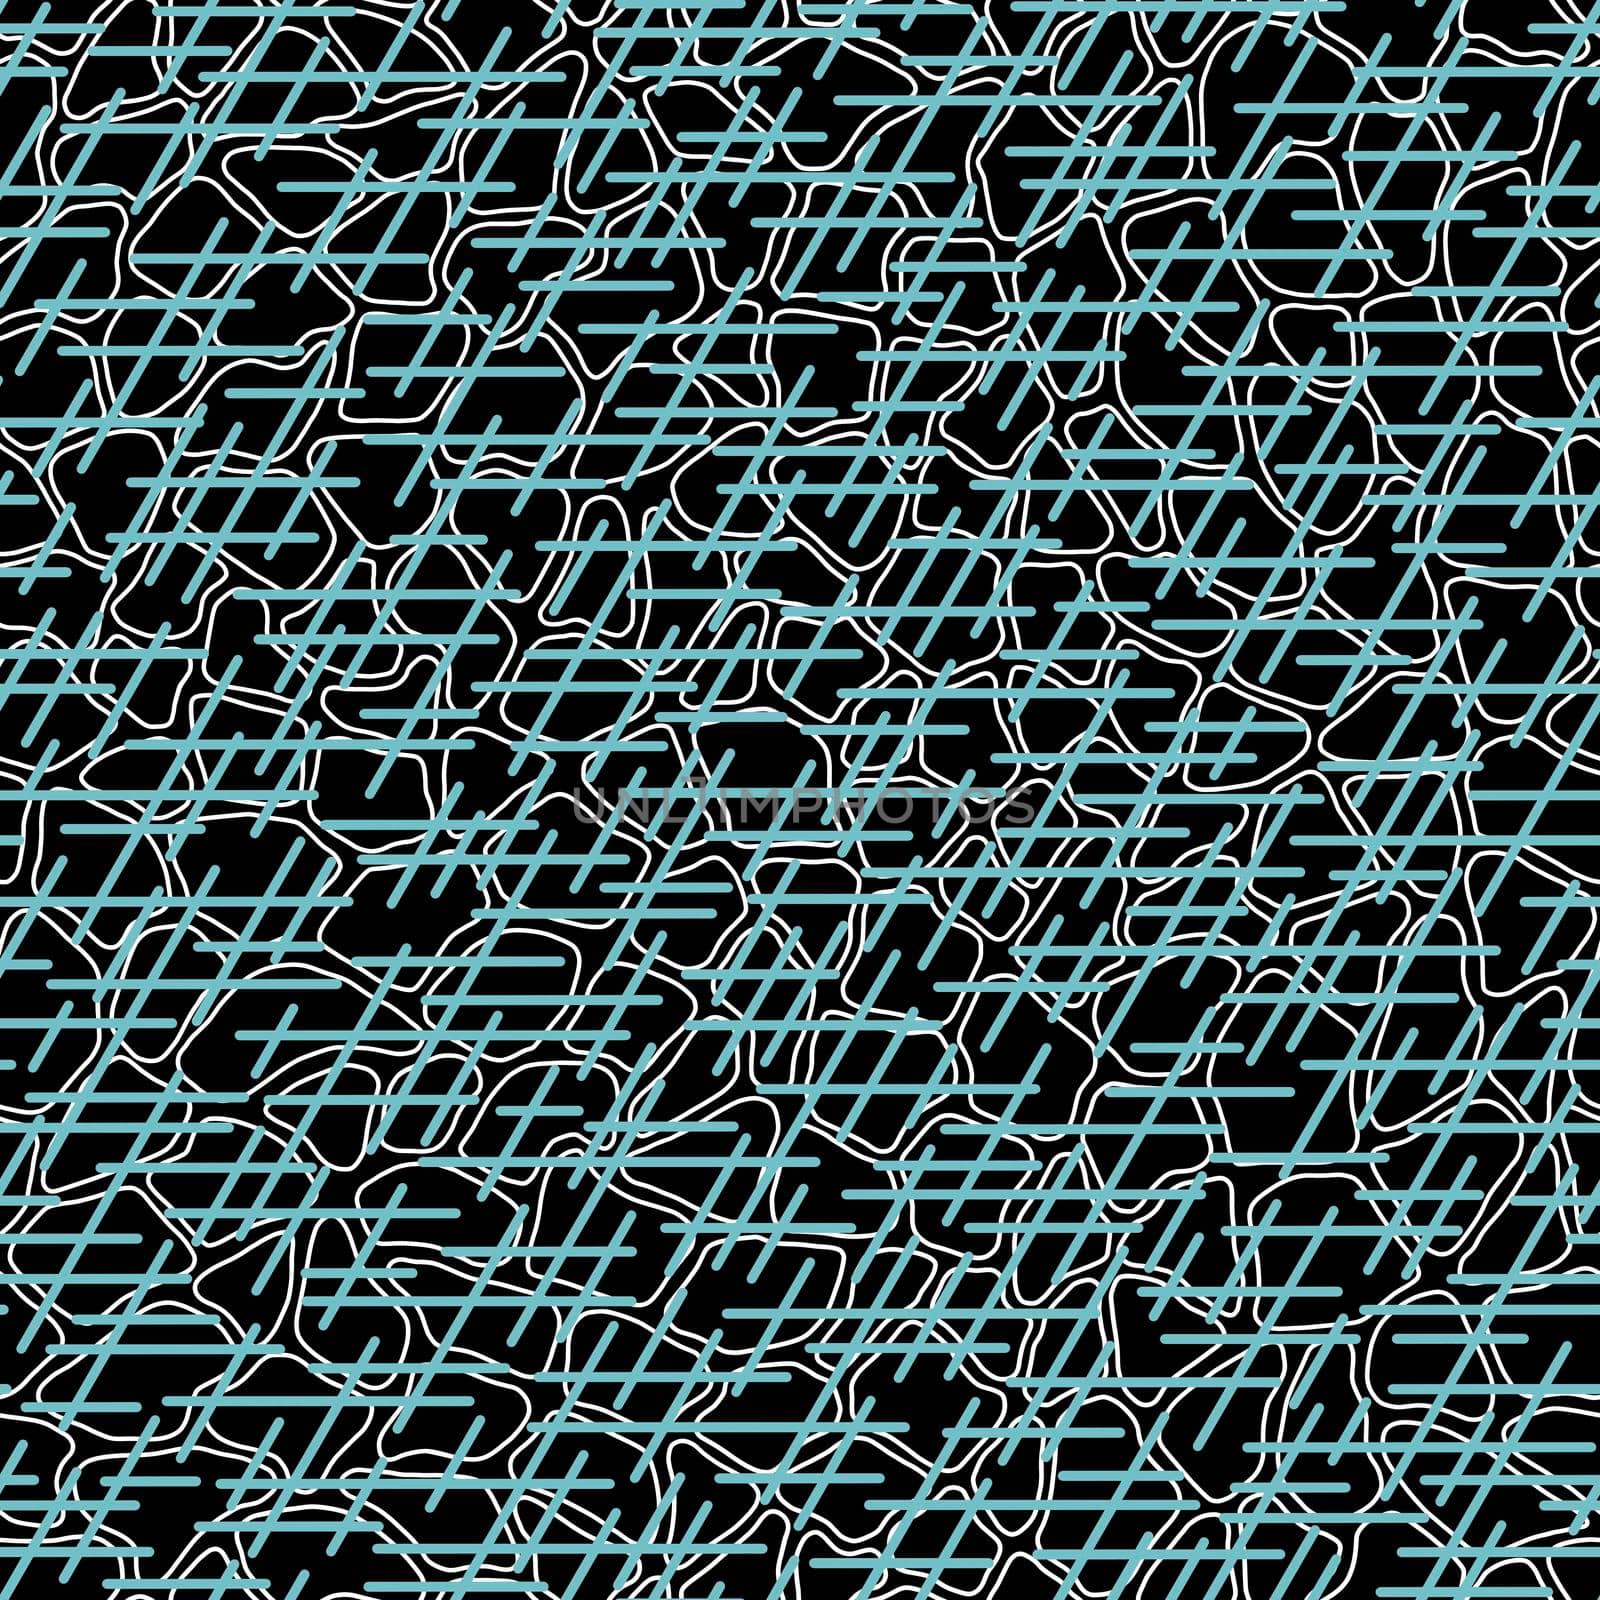 Randomly crossing lines making pattern.Chaotic short lines seamless pattern,chips and sticks modern repeatable motif.Good for print, textile,fabric, background, wrapping paper.Black azure white colors by Angelsmoon